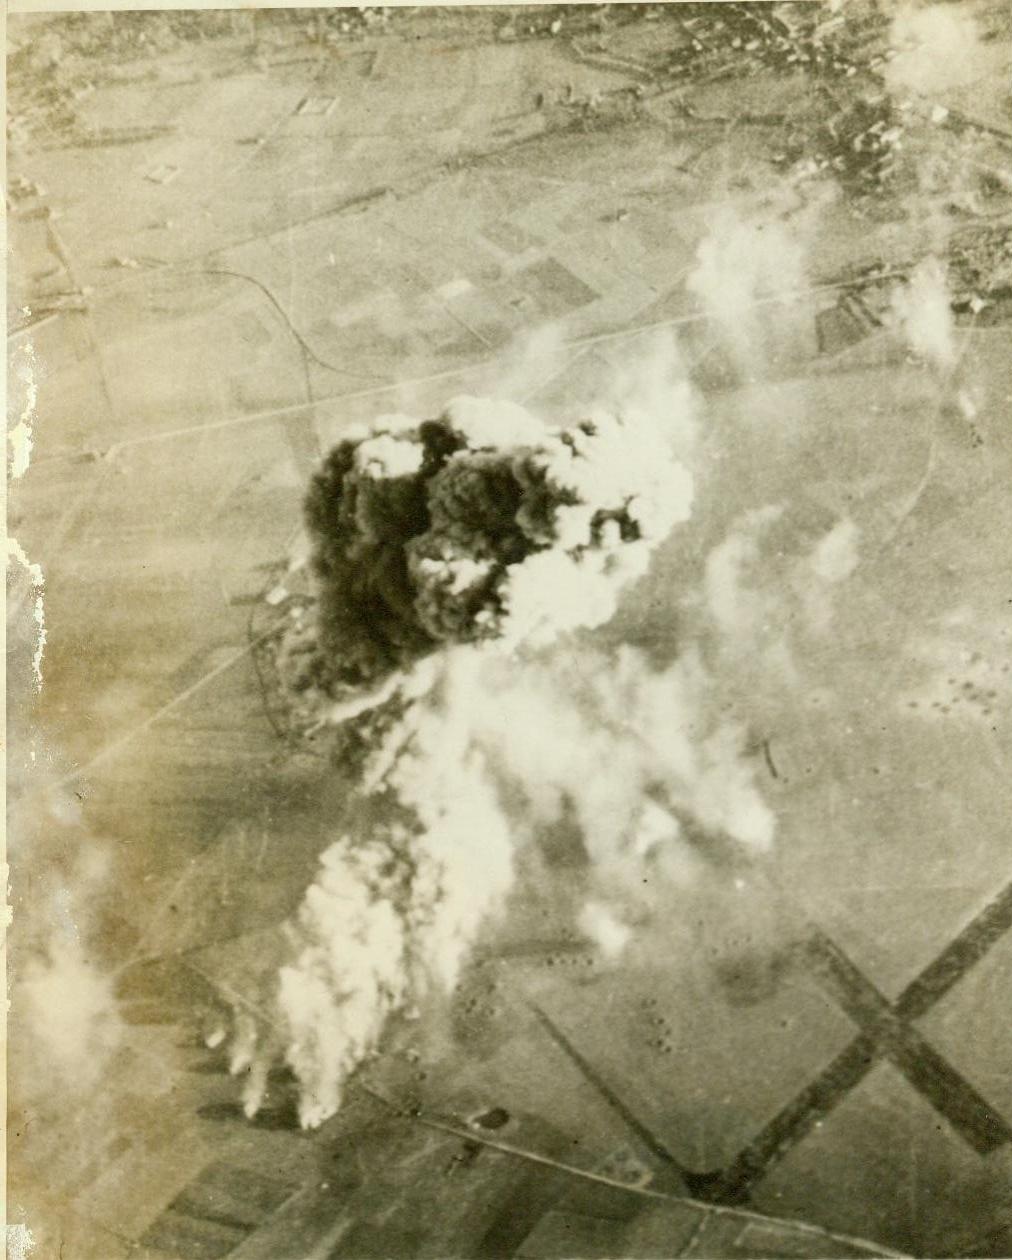 Nazi fuel goes up in smoke, 1/3/1944. A column of smoke, 4,000 feet high, rises from a German fuel storage dumb on the airfield at Chievres, France, after Martin B-26 Marauder medium bombers of the U.S. Army 8th Air Force had blasted it last Nov. 29. The concussion from exploding fuel was so great that the attacking bombers were bounced about in the air. The “X” (lower right), is the cross formed by the airfield’s runways. CREDIT LINE (U.S. Army official photo from ACME) 1-13-44;